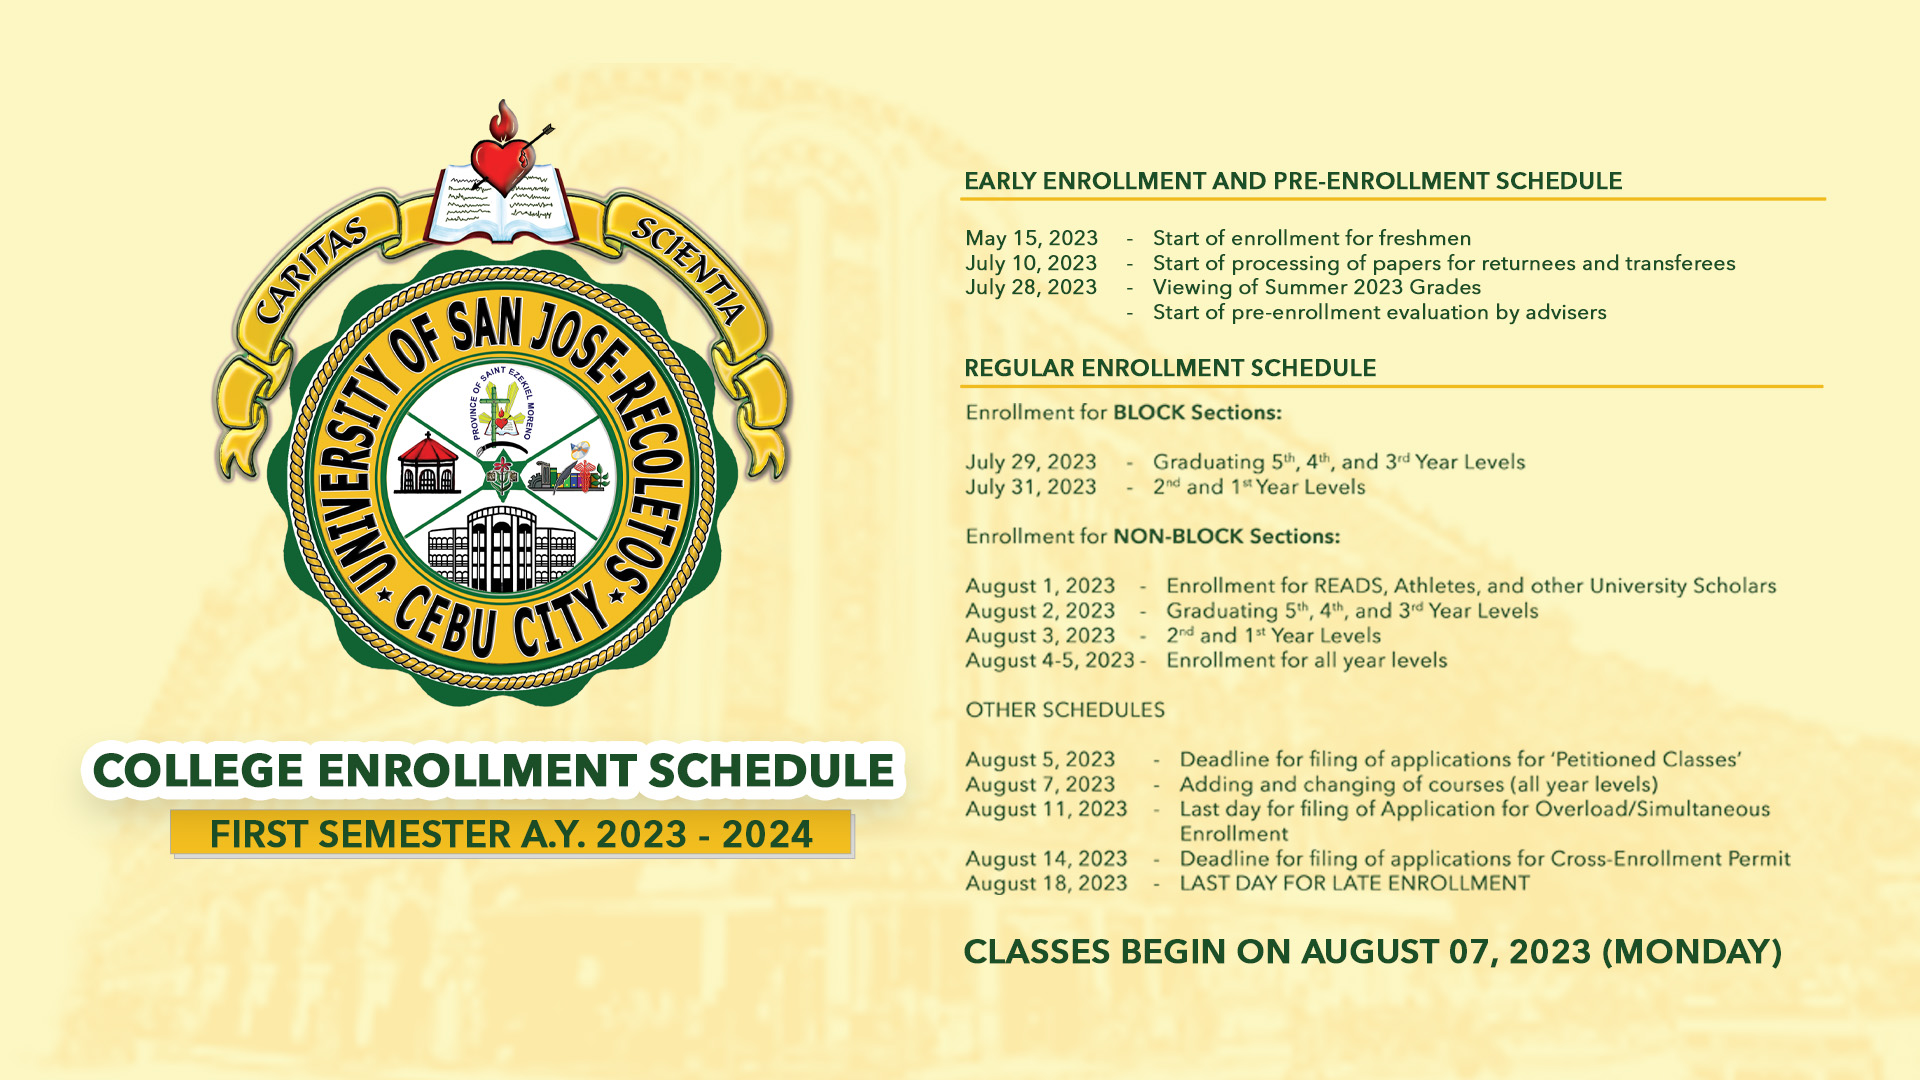 USJR publishes schedule of college enrollment for AY 20232024 first